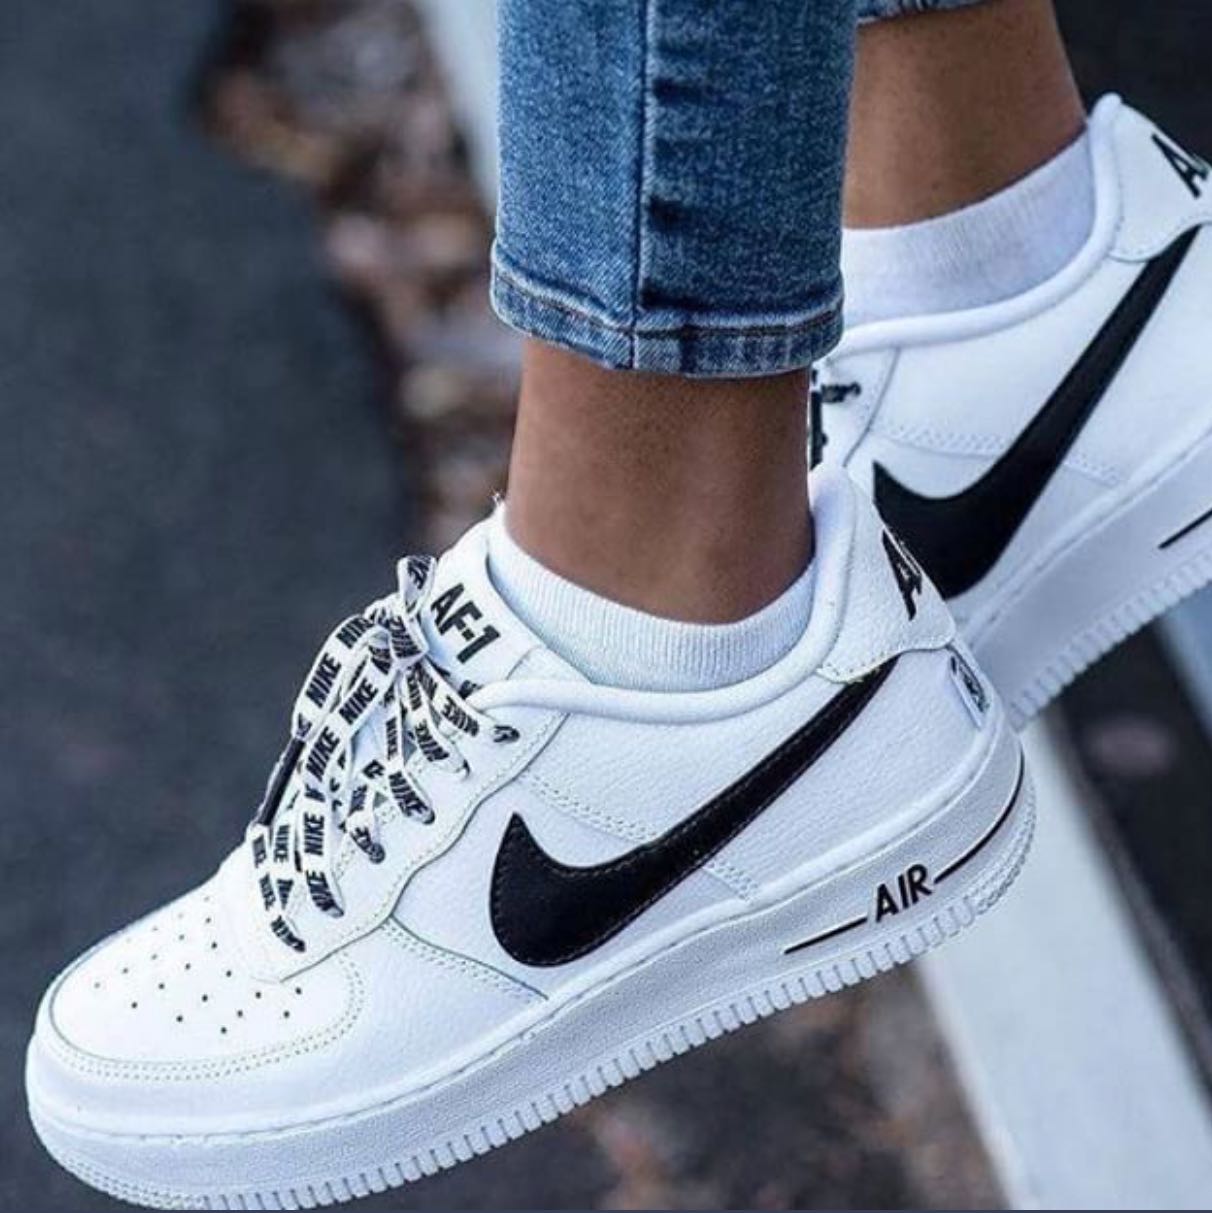 snipes air force 1 off 53% - www.simmba.in